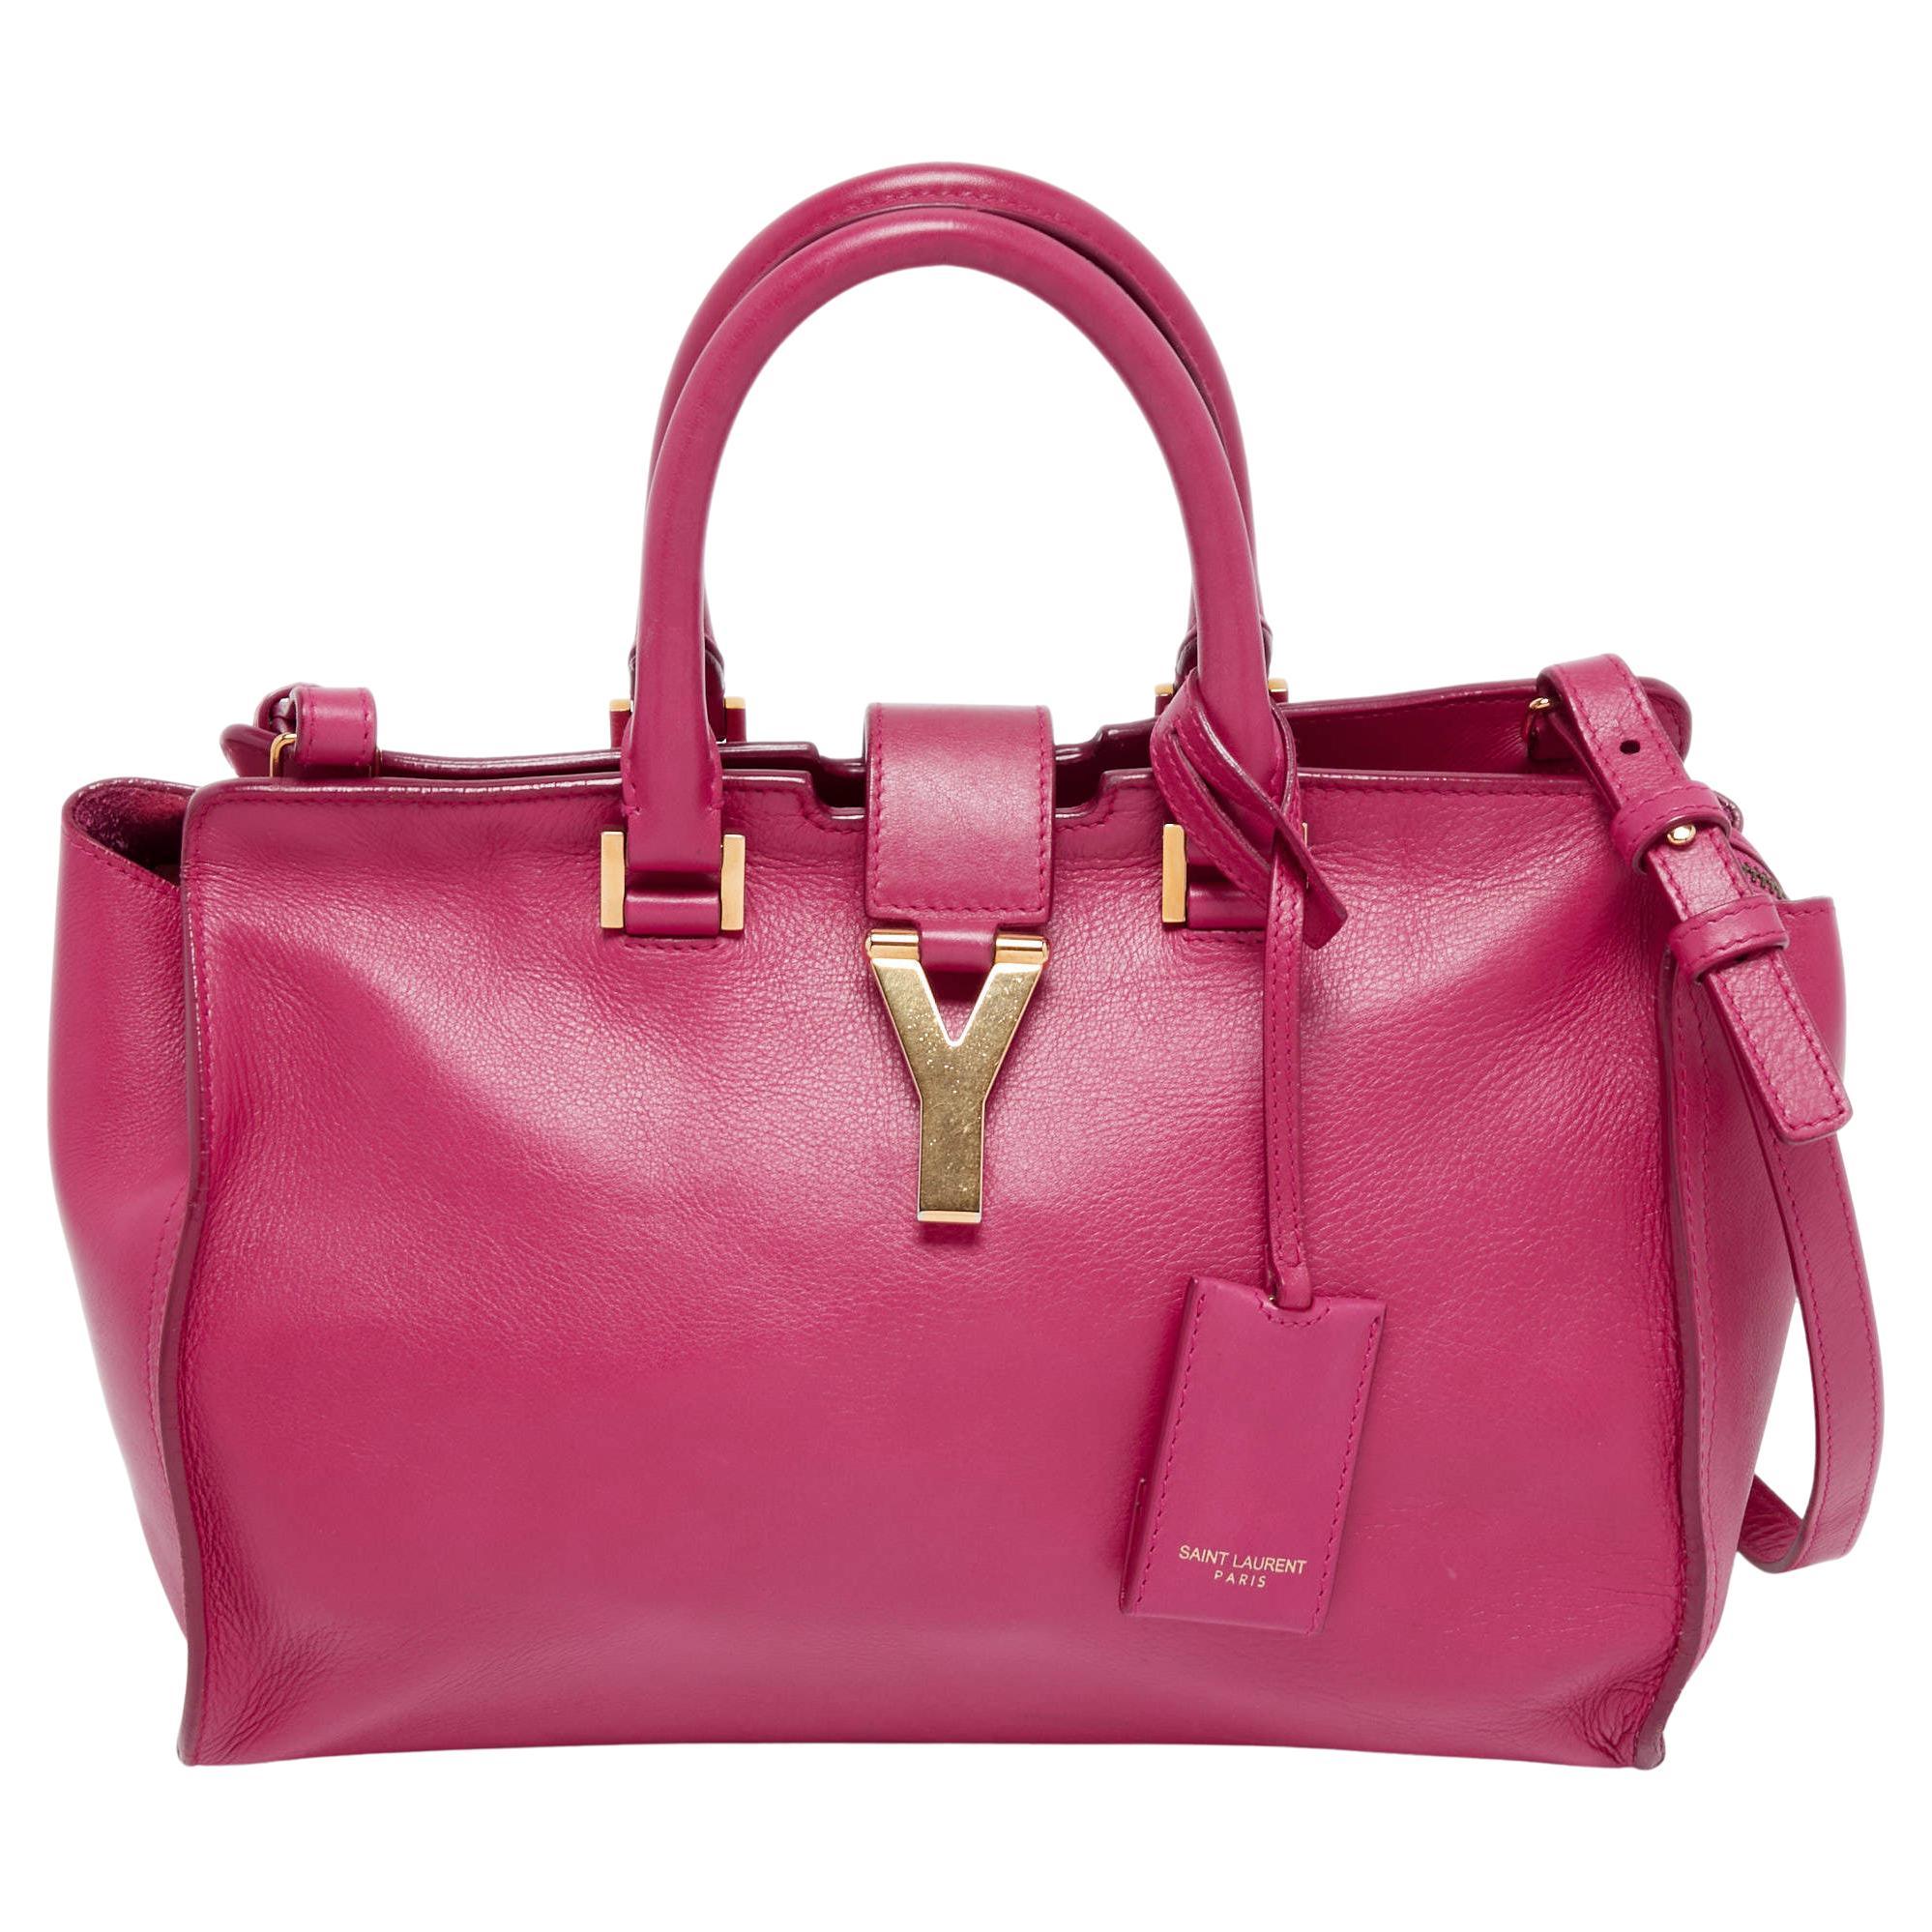 Saint Laurent Pink Grained Leather Small Cabas Chyc Tote For Sale